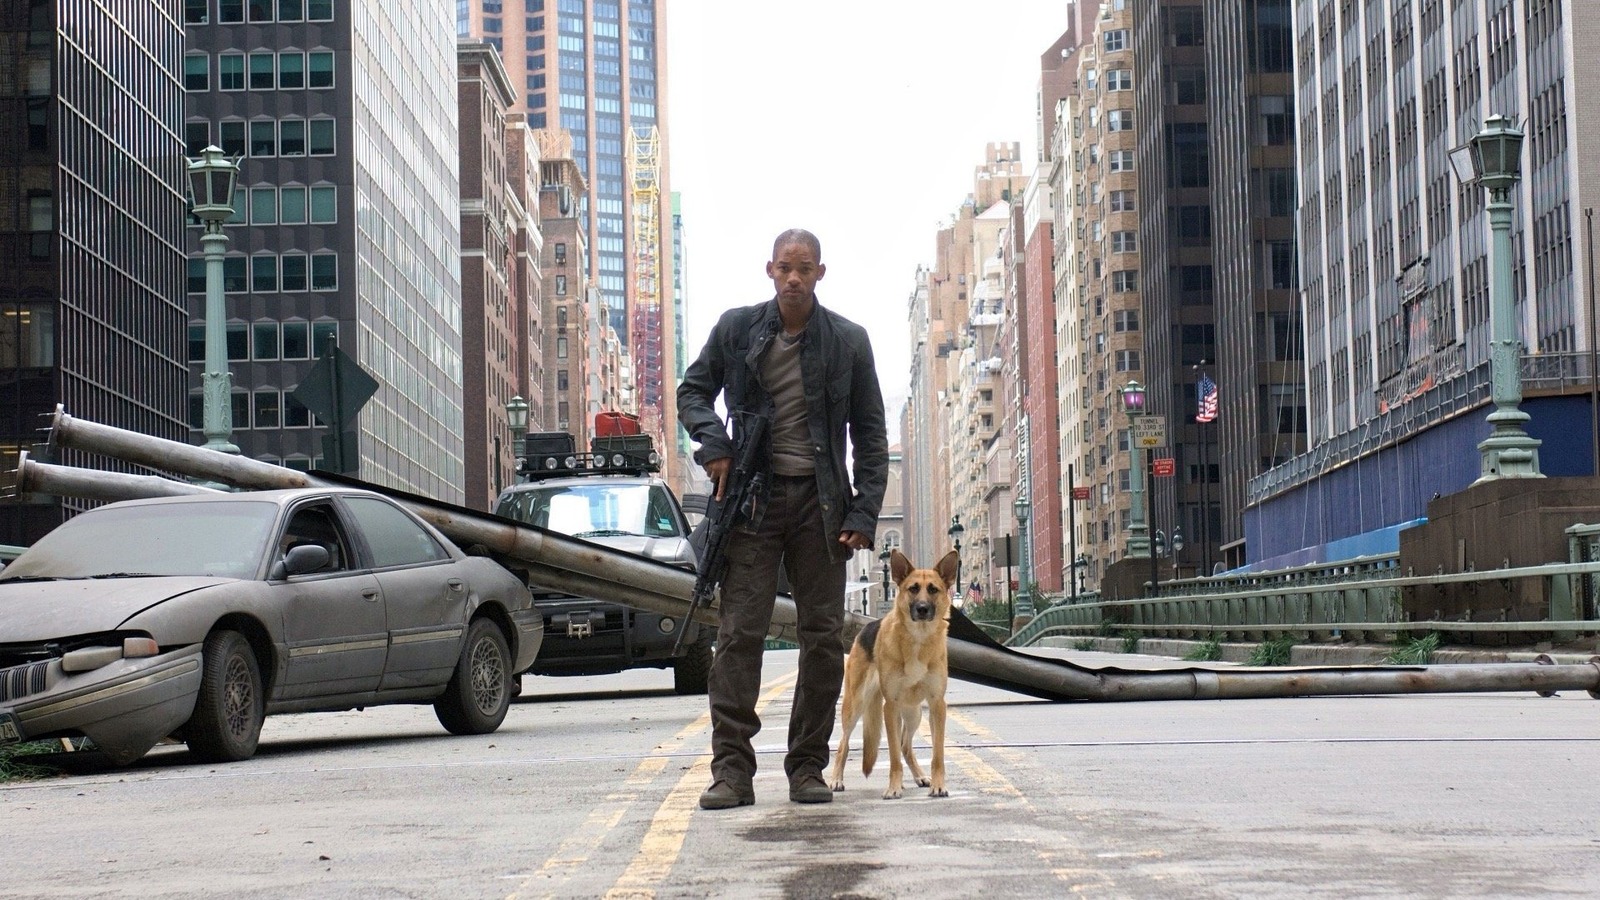 I Am Legend Showcases The Folly Of Not Using The Greatest Horror Ending Of All Time